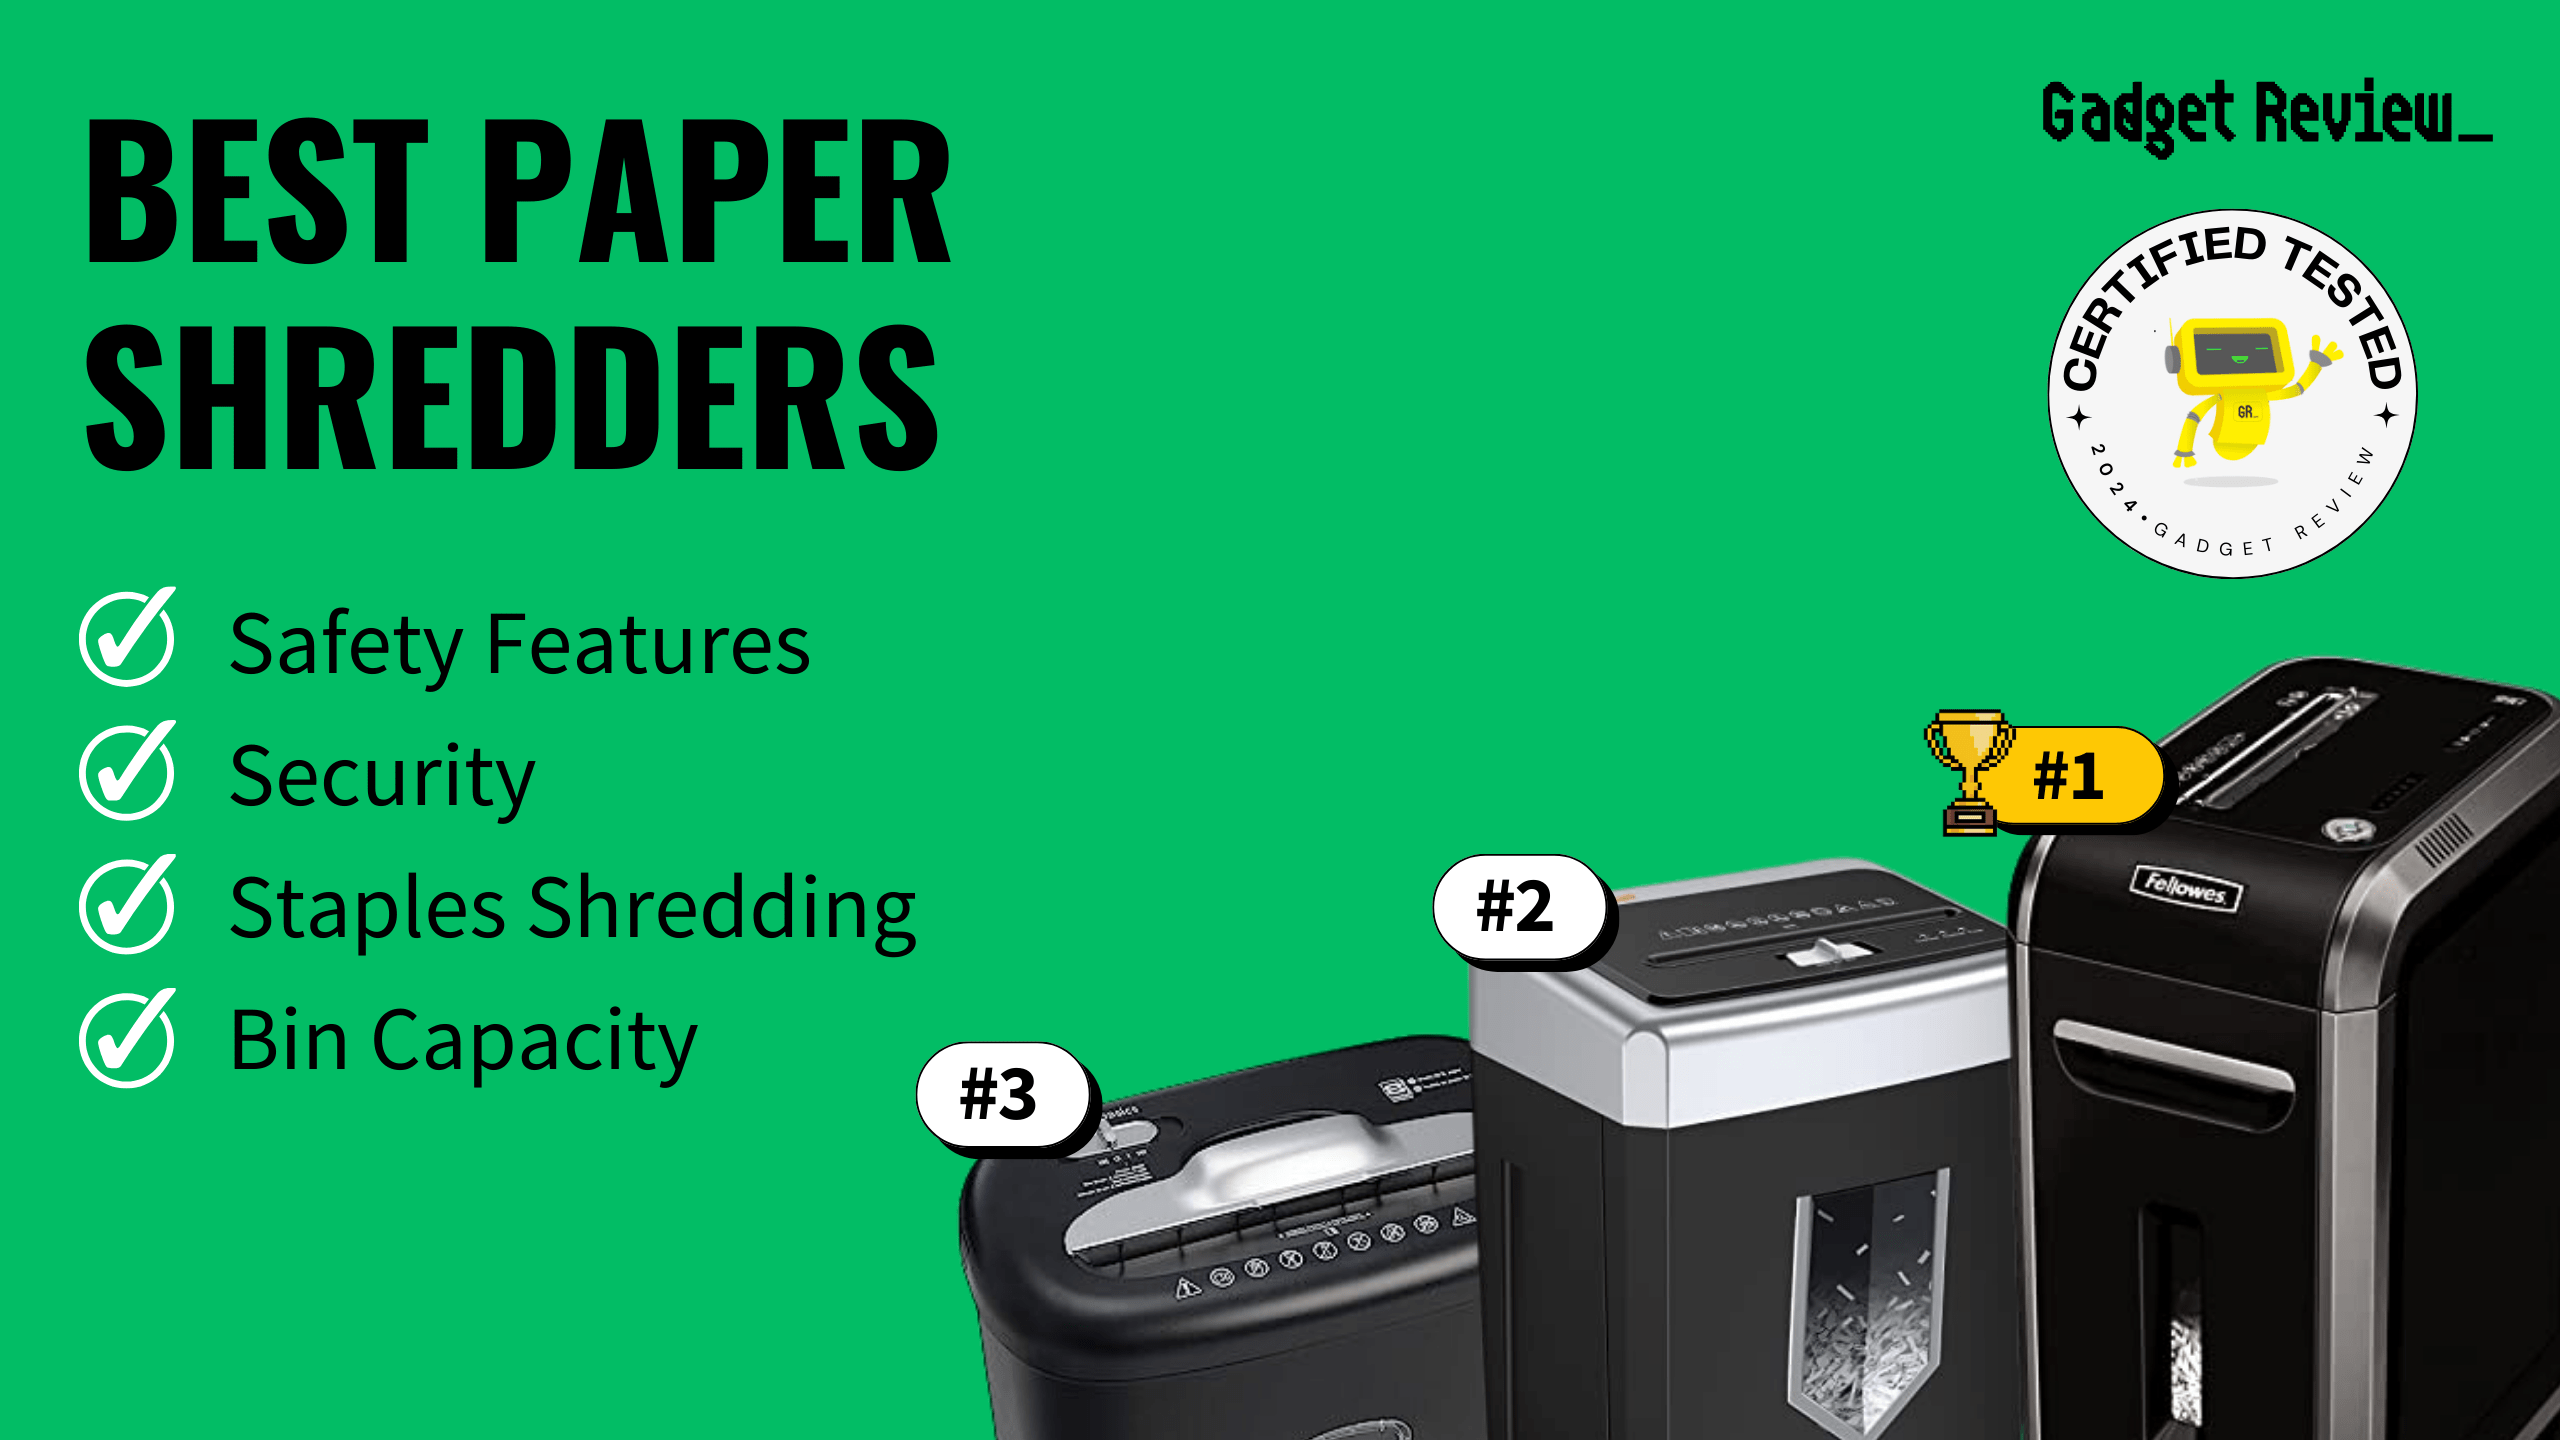 best paper shredders guide that shows the top best home appliance model